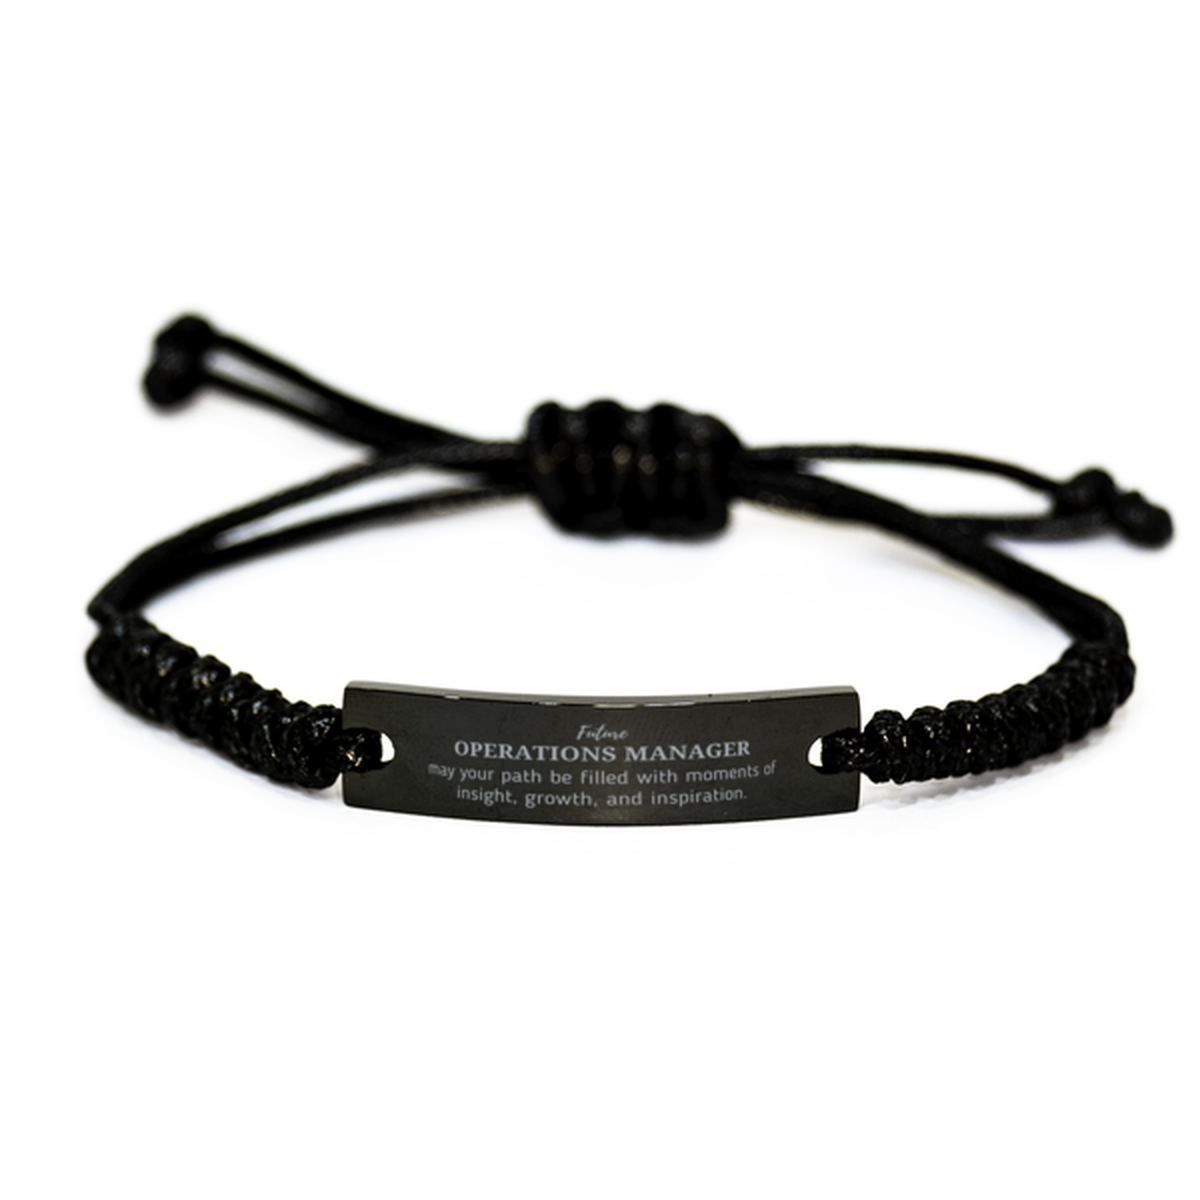 Future Operations Manager Gifts, May your path be filled with moments of insight, Graduation Gifts for New Operations Manager, Christmas Unique Black Rope Bracelet For Men, Women, Friends